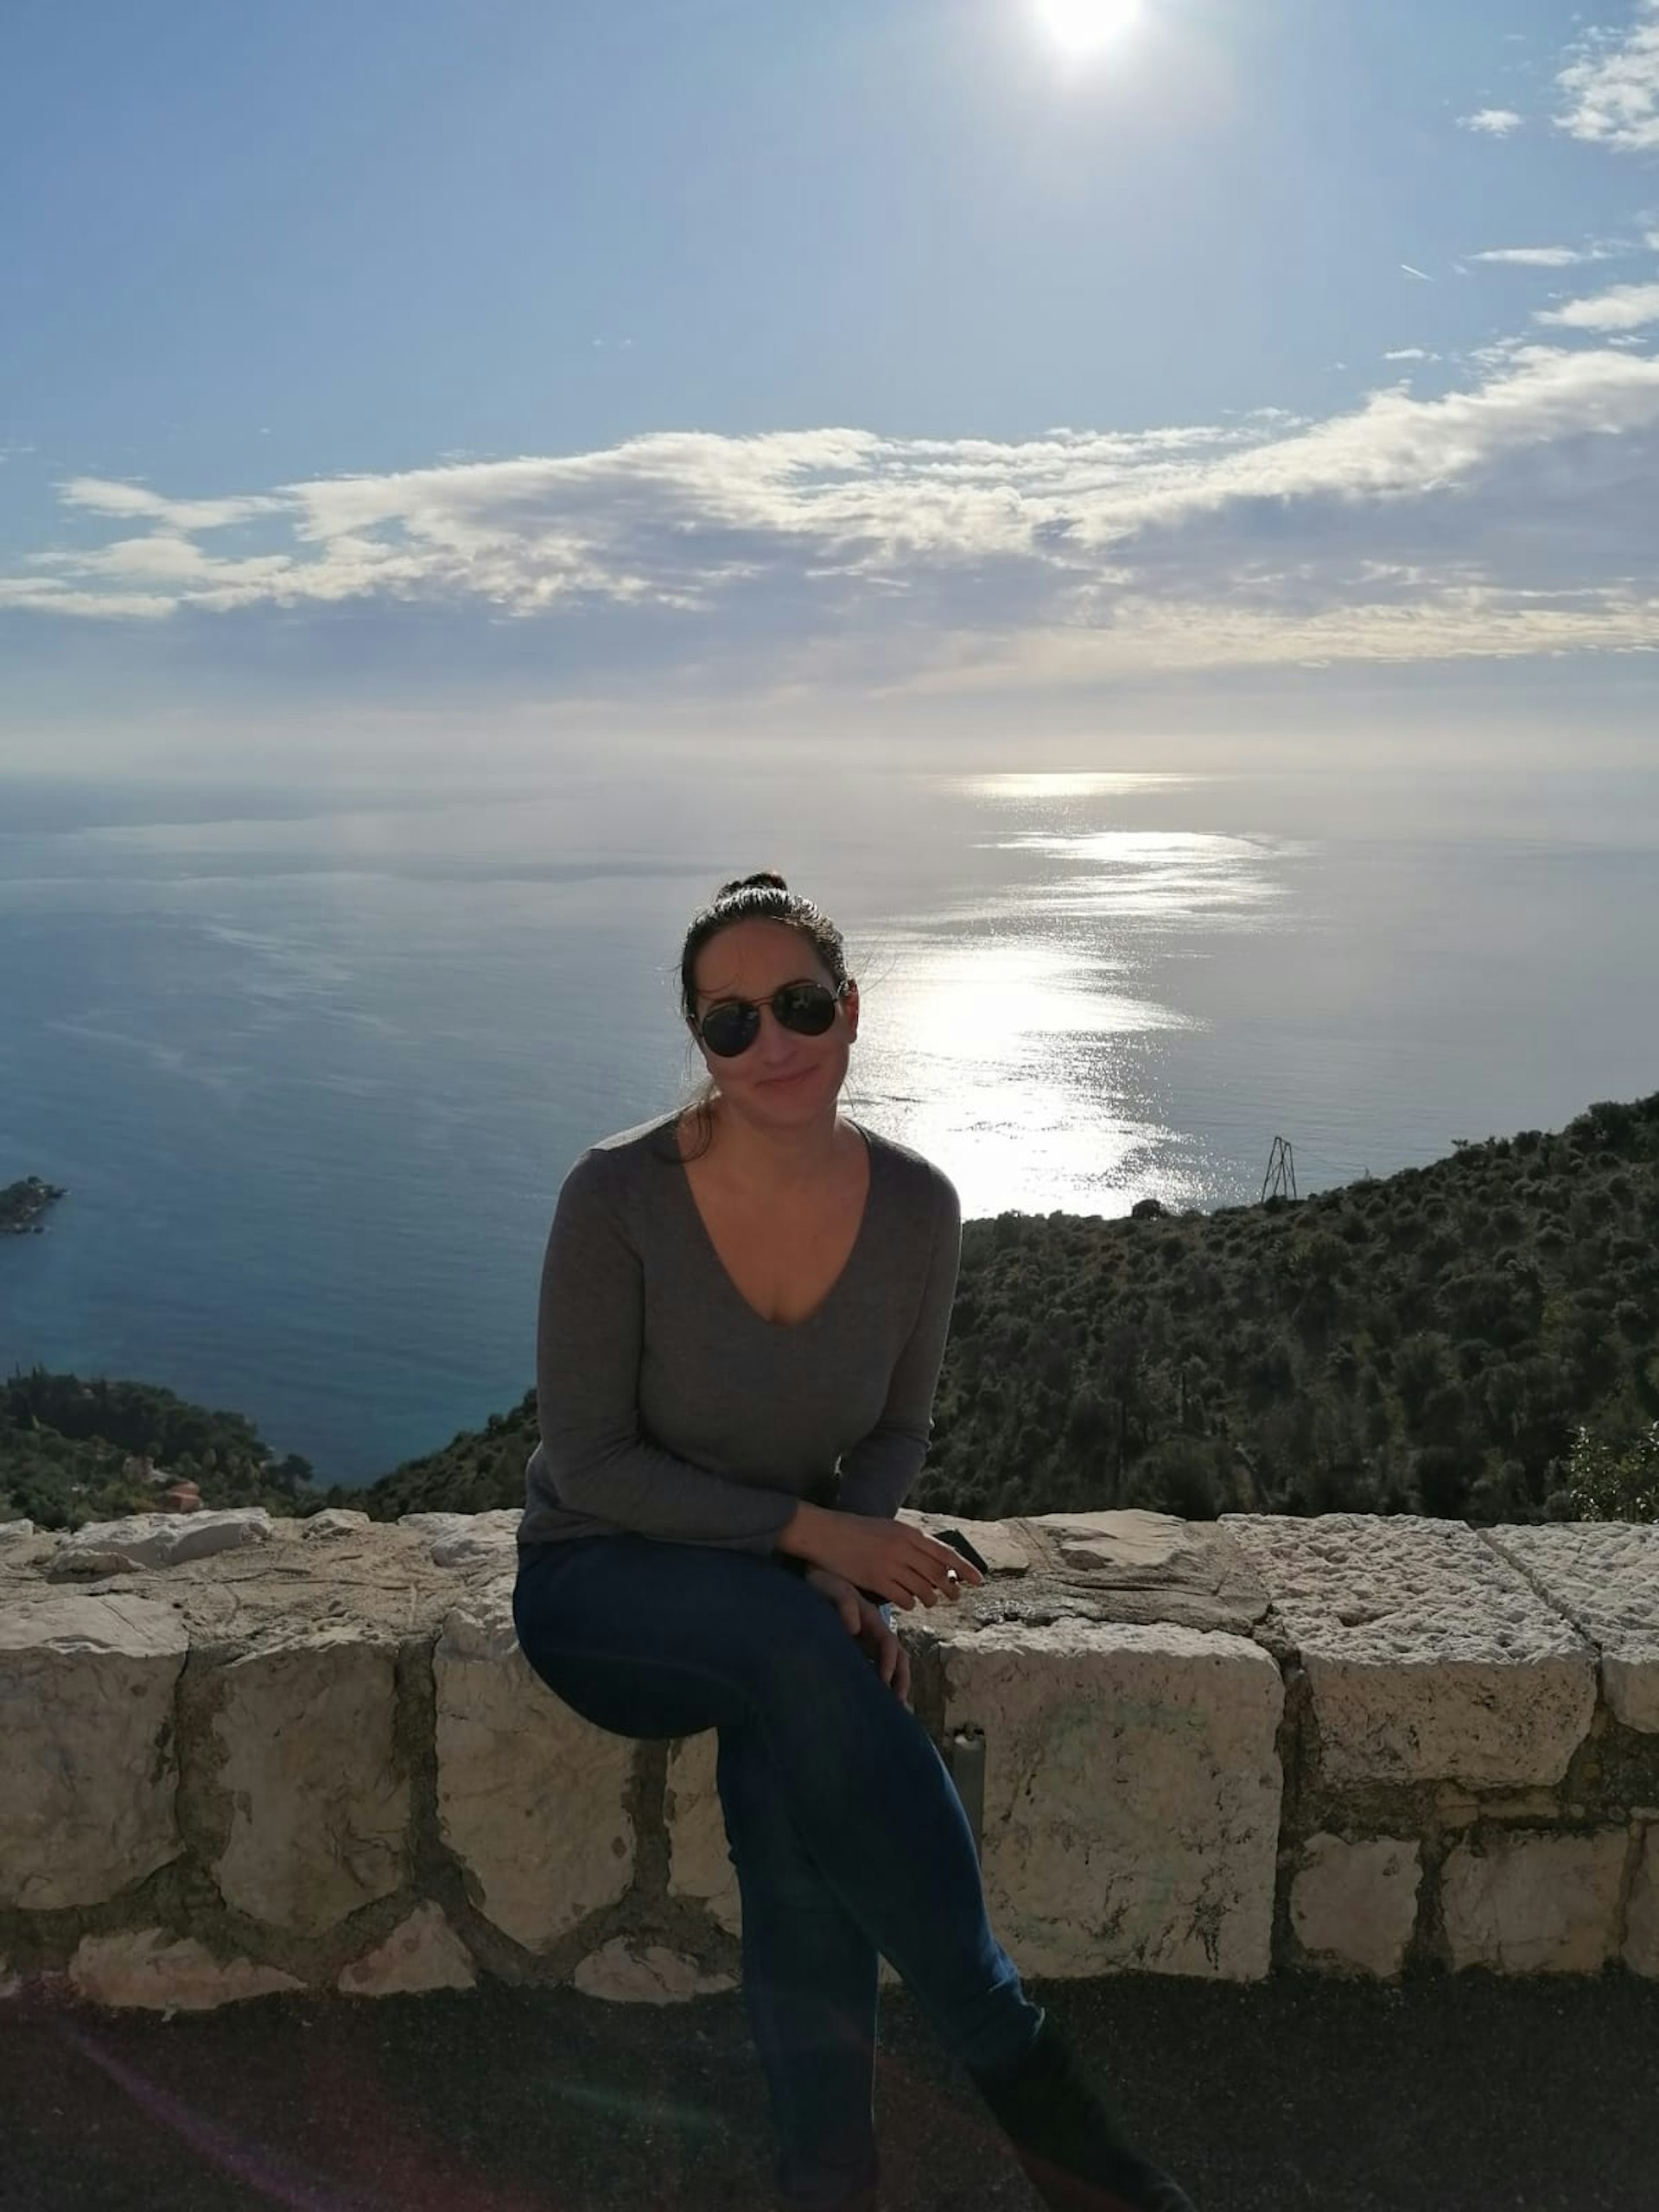 A woman sitting on a wall wearing sunglasses. The sea is sparkling in the distance